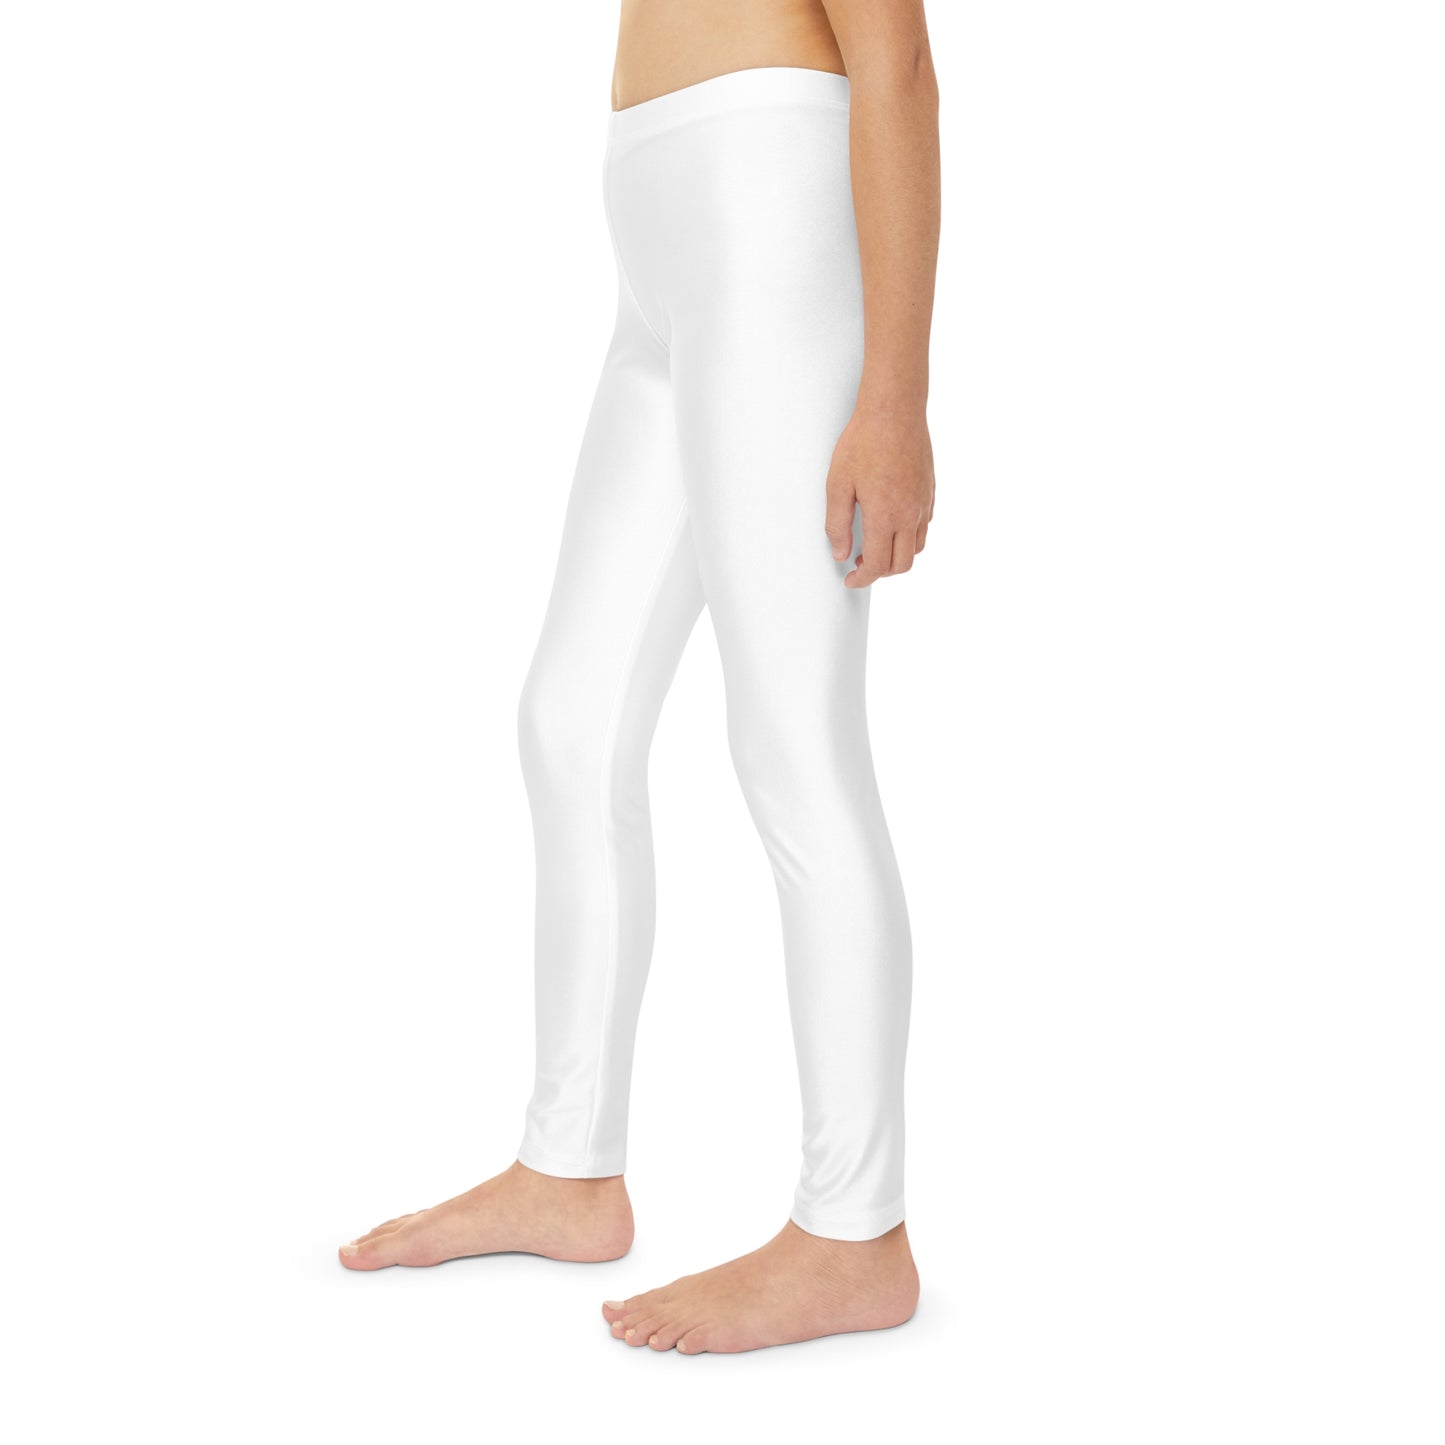 Ath"leisure" Collection- Ath"leisure" Youth Full-Length Leggings